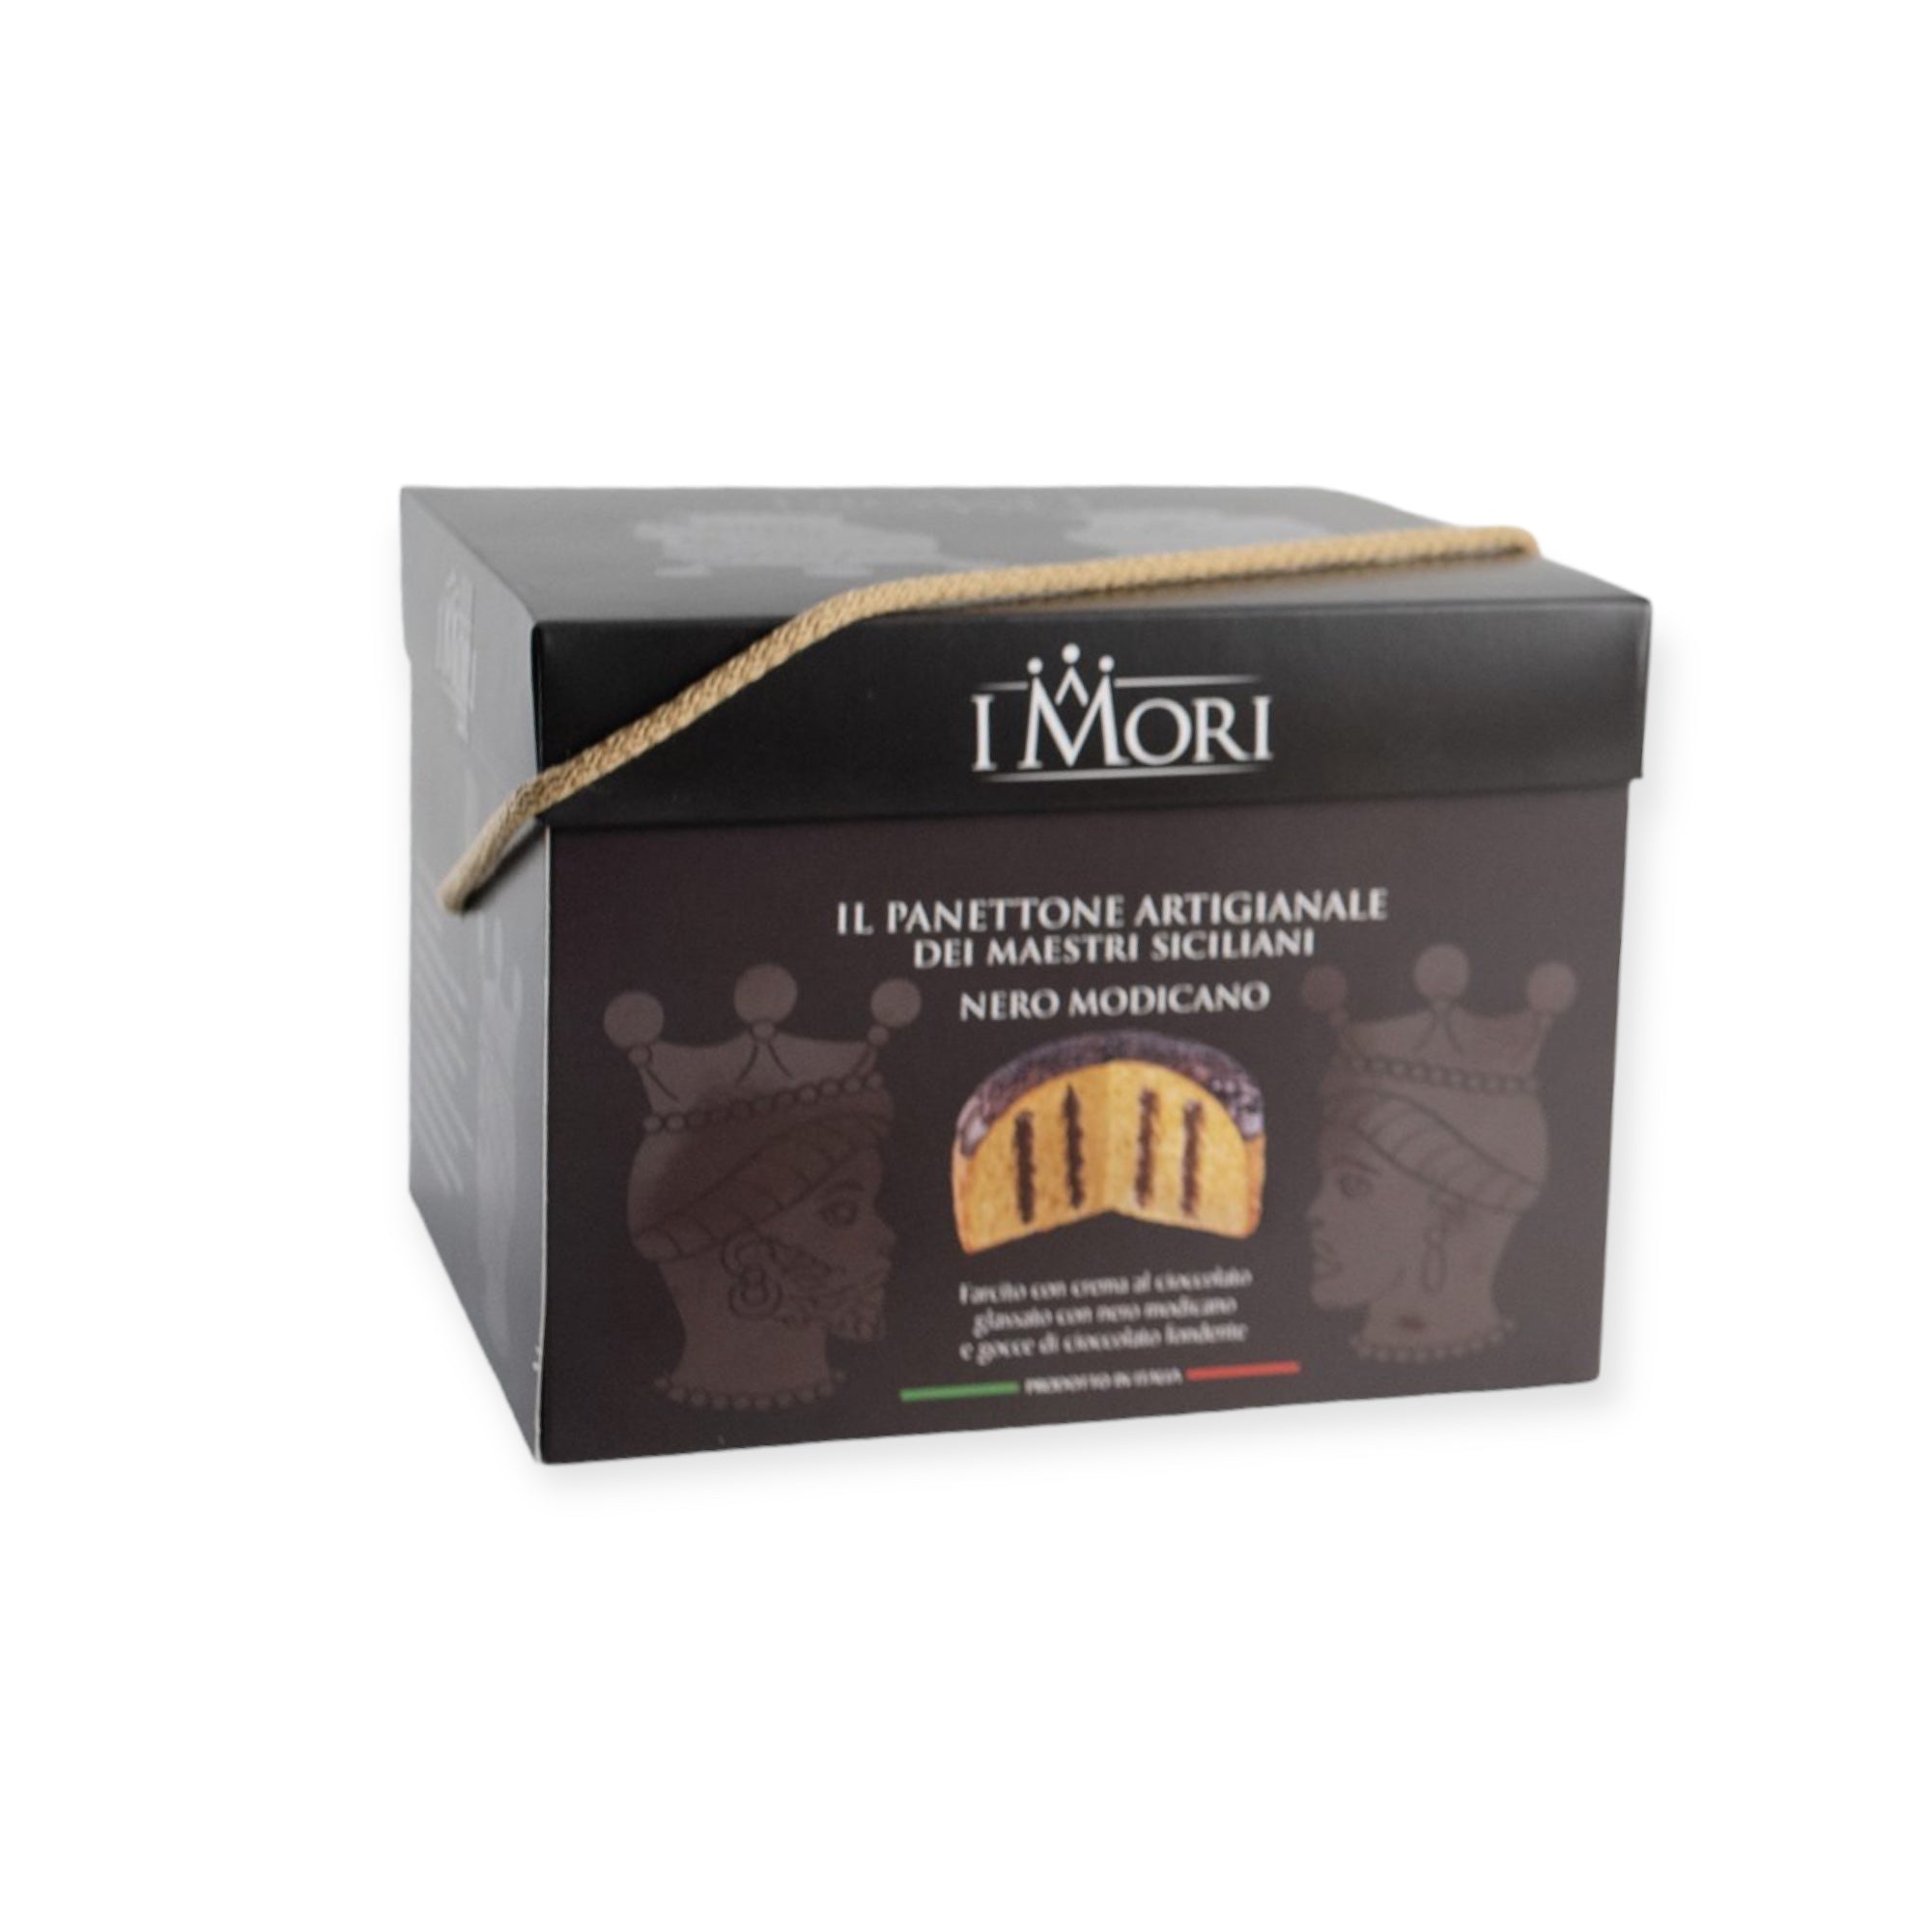 Artisanal Panettone With Chocolate Cream & Covered With Chocolate 900g By I Mori 900g